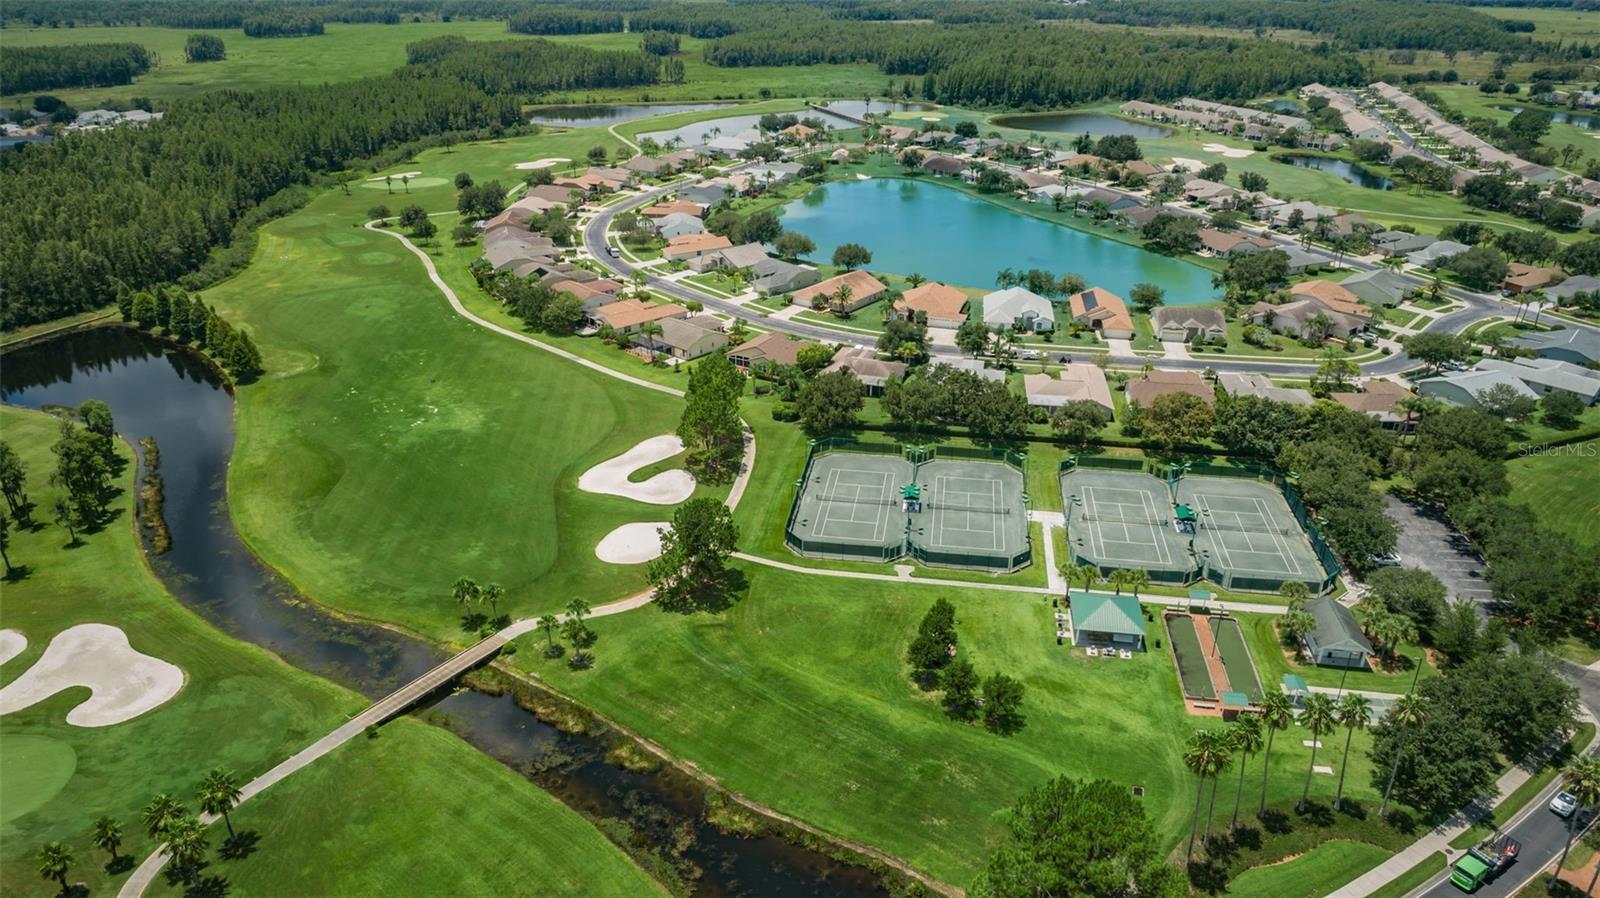 Tennis Courts & Golf Course